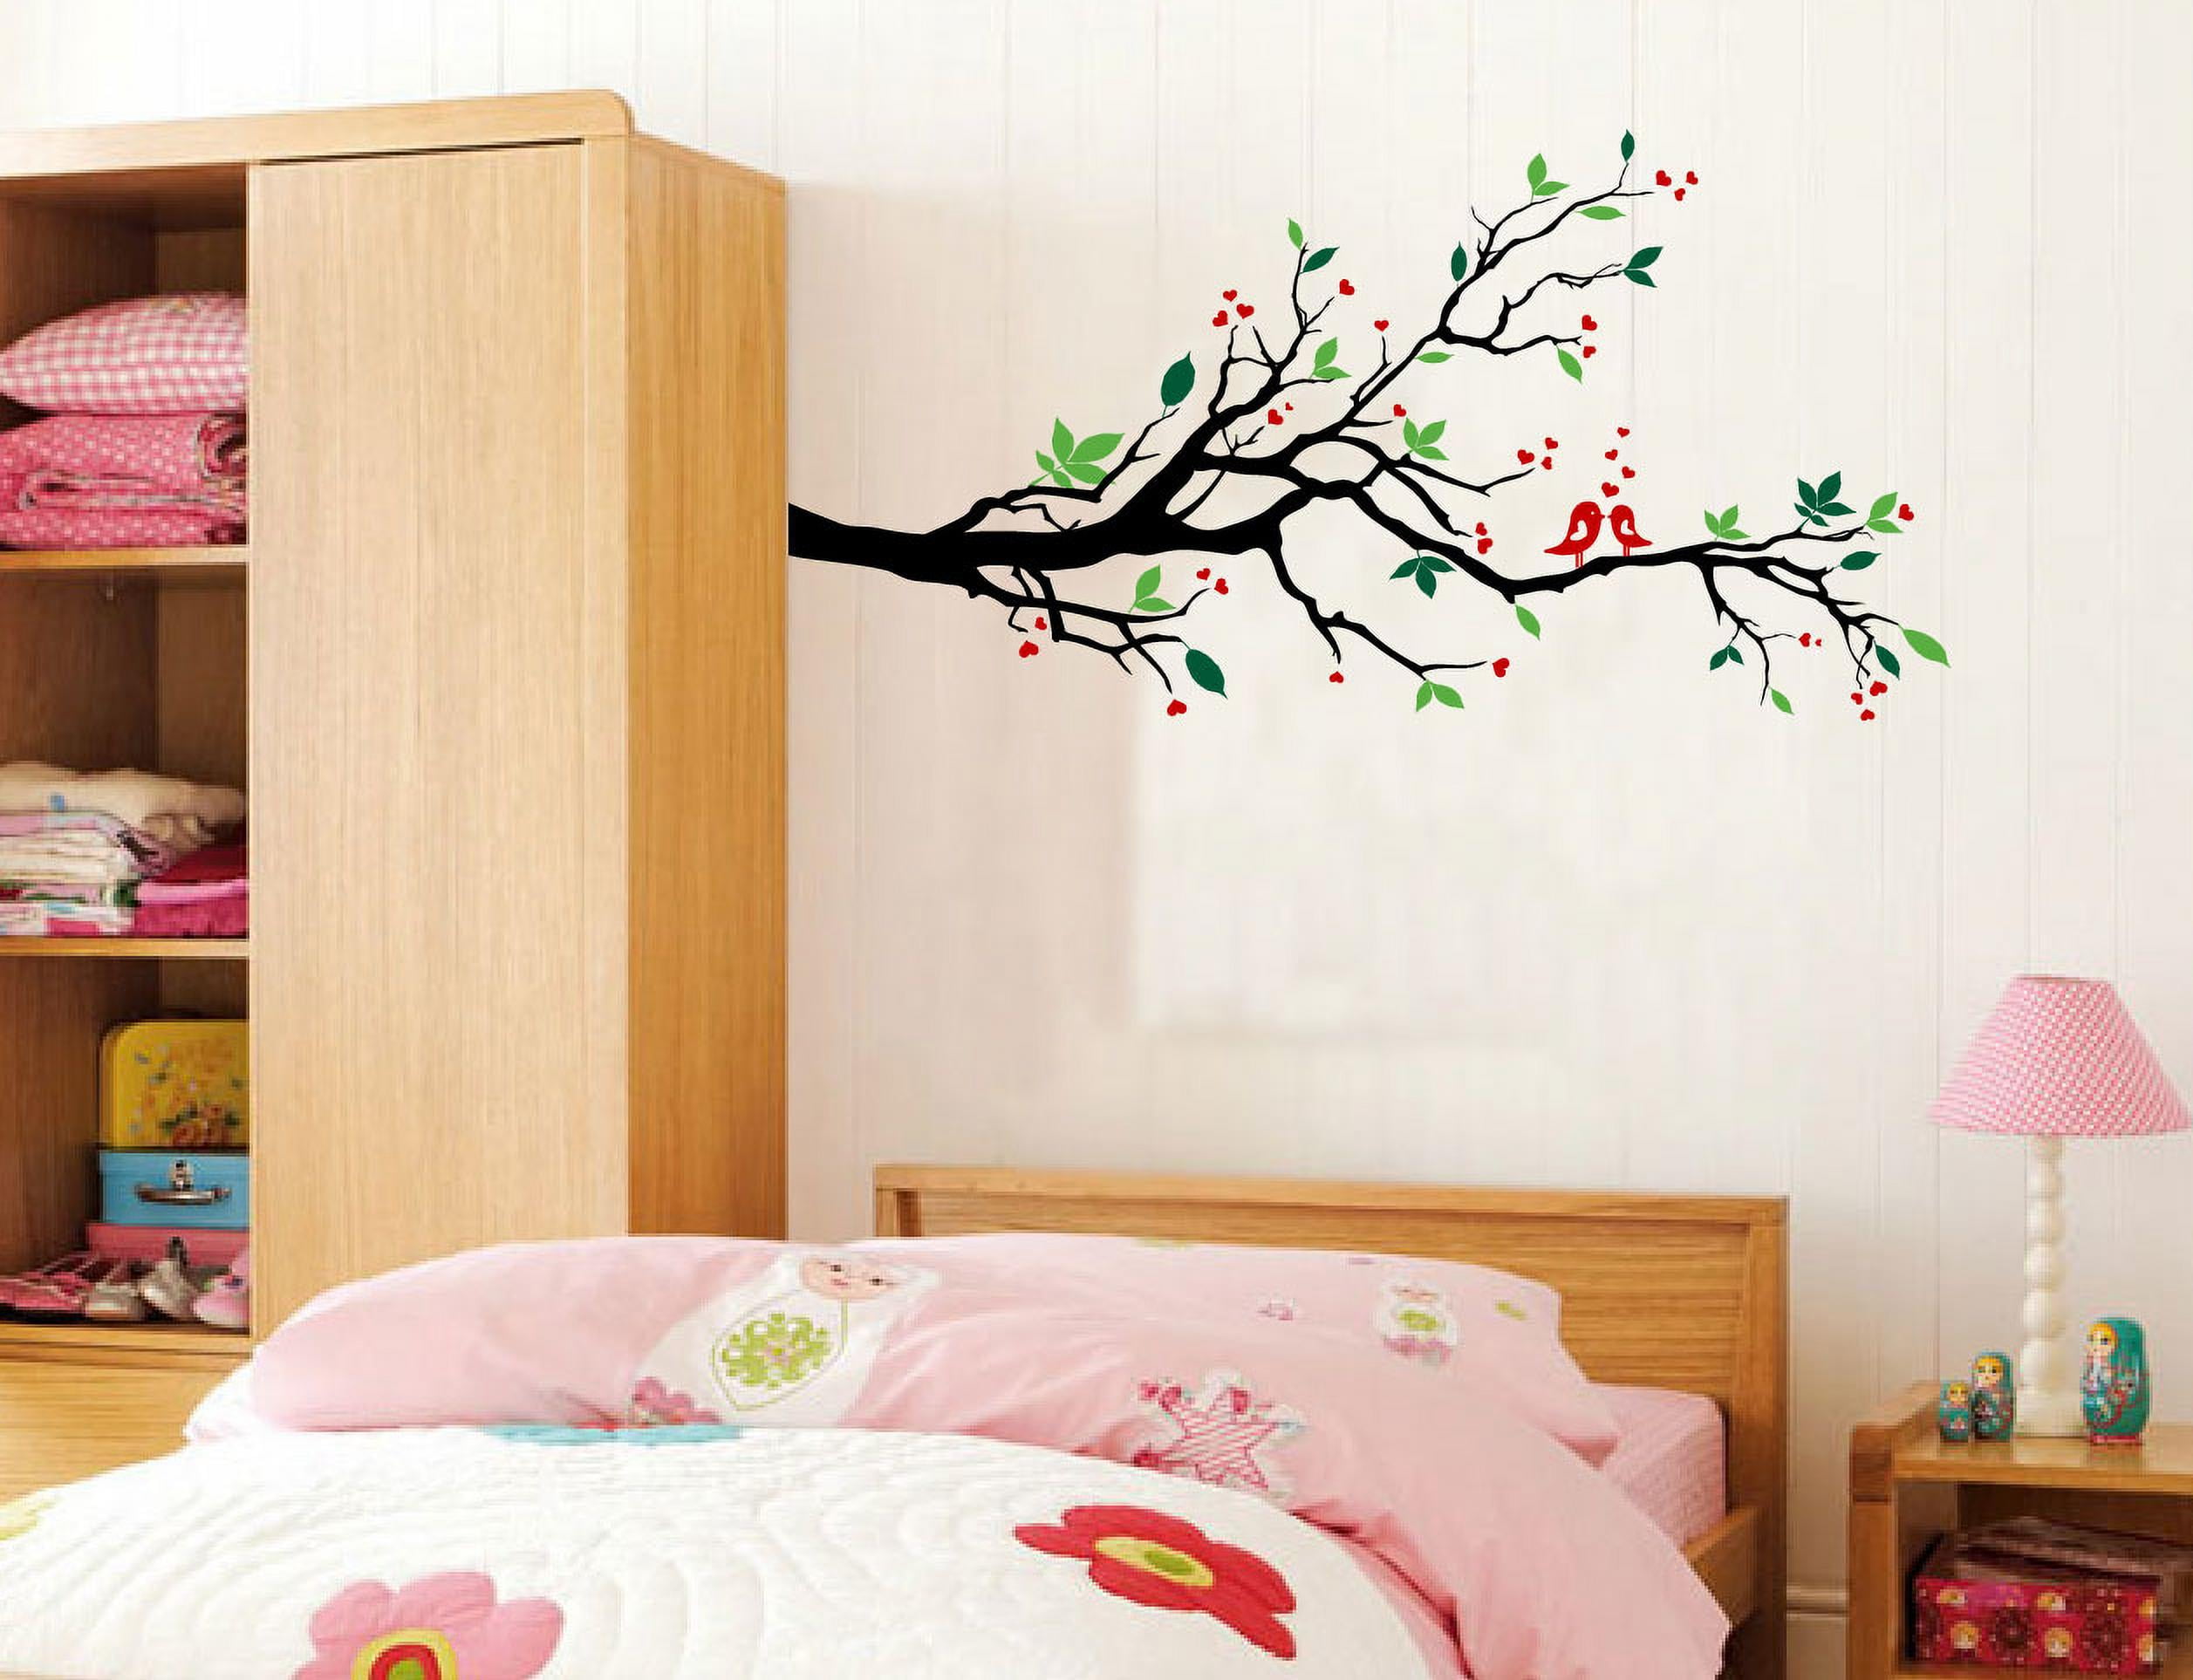 Details about   Autumn Tree Lamp Post Wall Stickers Baby Room Bedroom Decals Vinyl Decor 